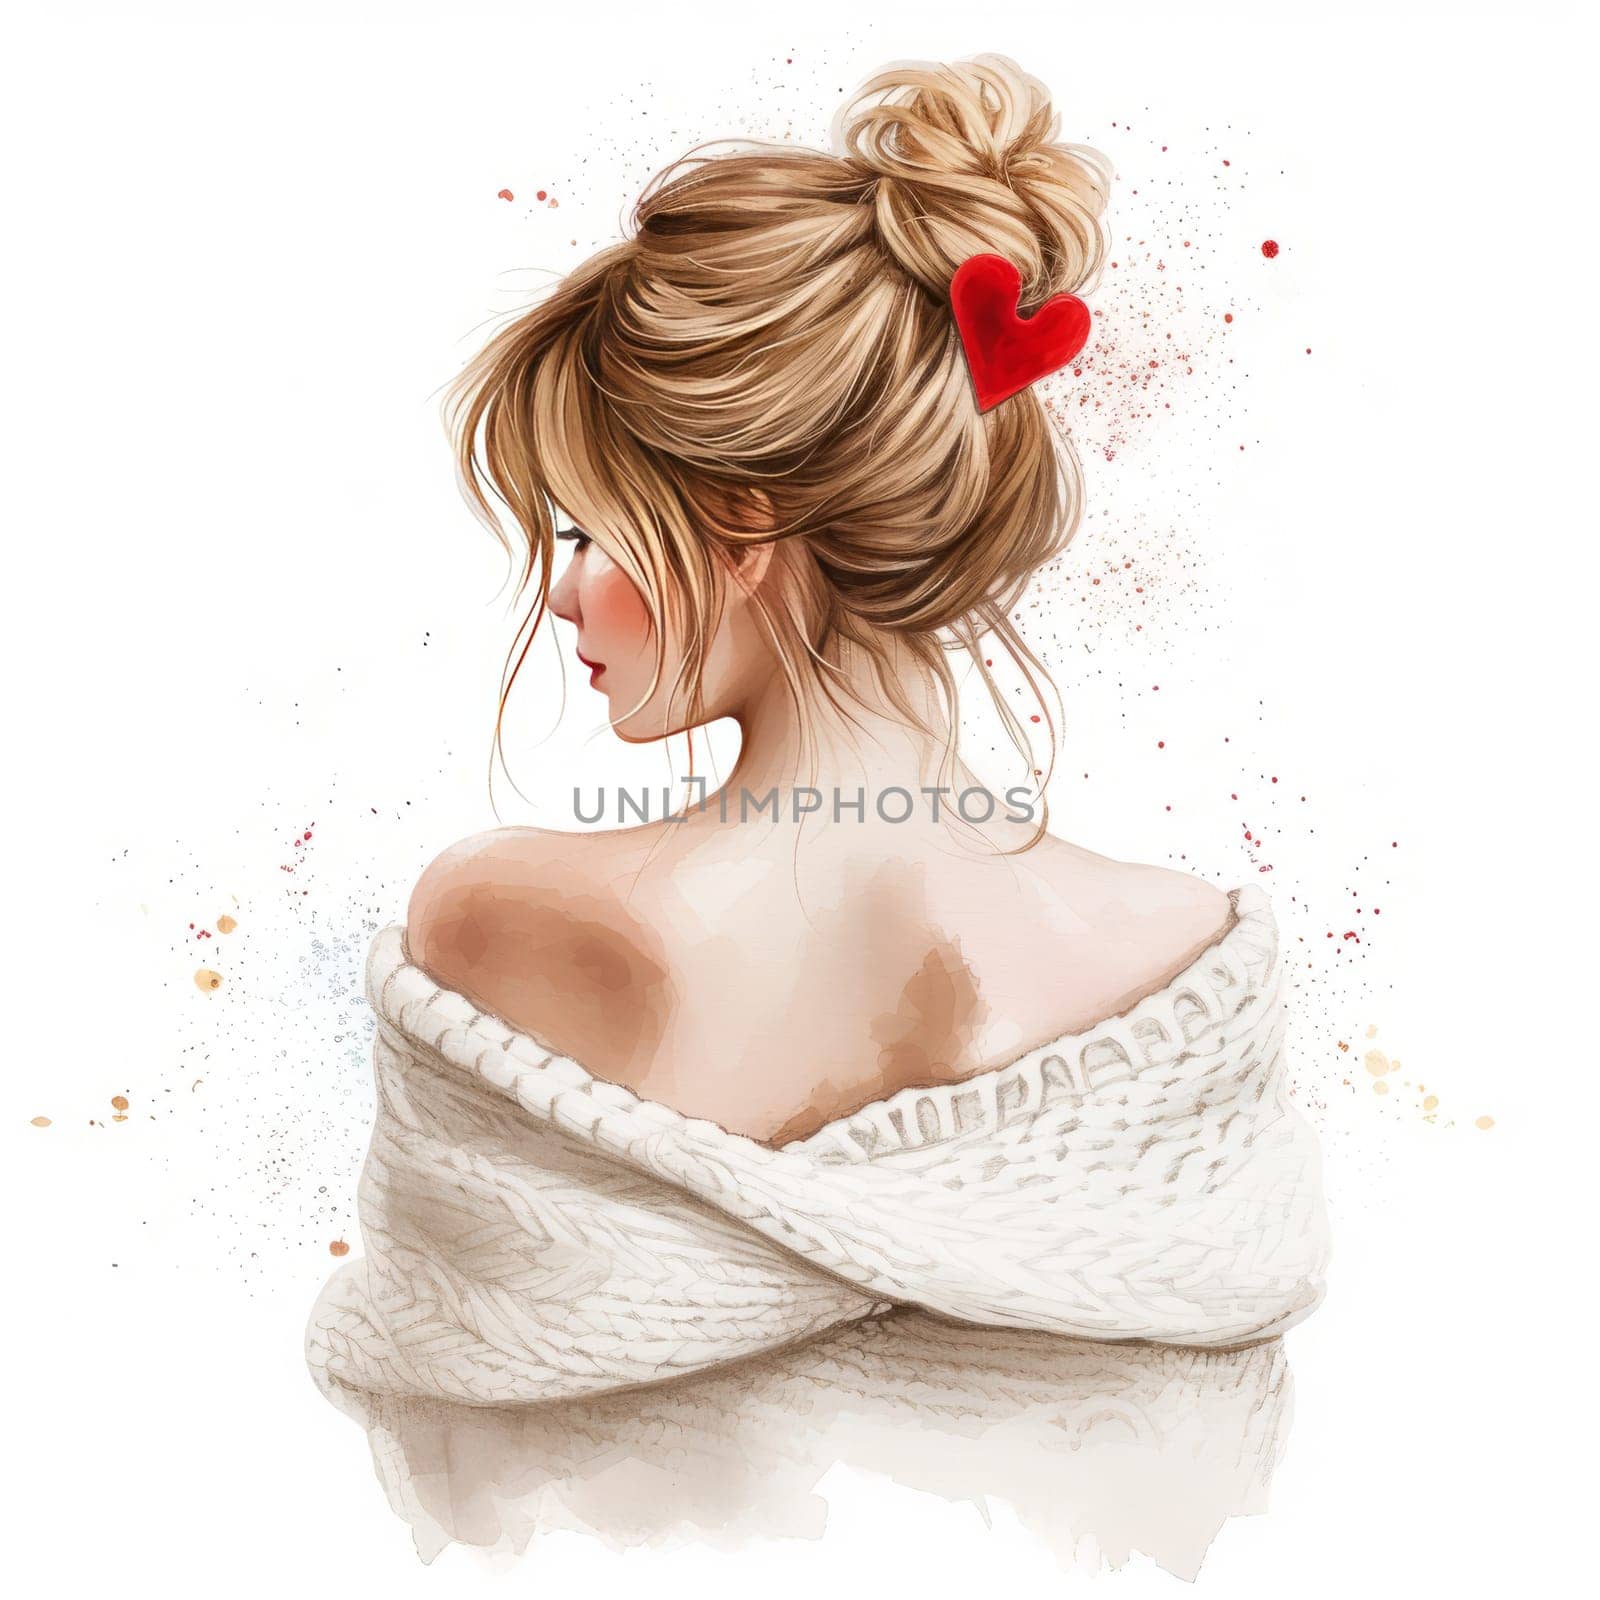 Png Watercolor Beautiful Romantic Young Woman Back View Illustration, Messy Hair with Heart Shape Hairpin. Valentine's Day or Birthday Clip Art by iliris